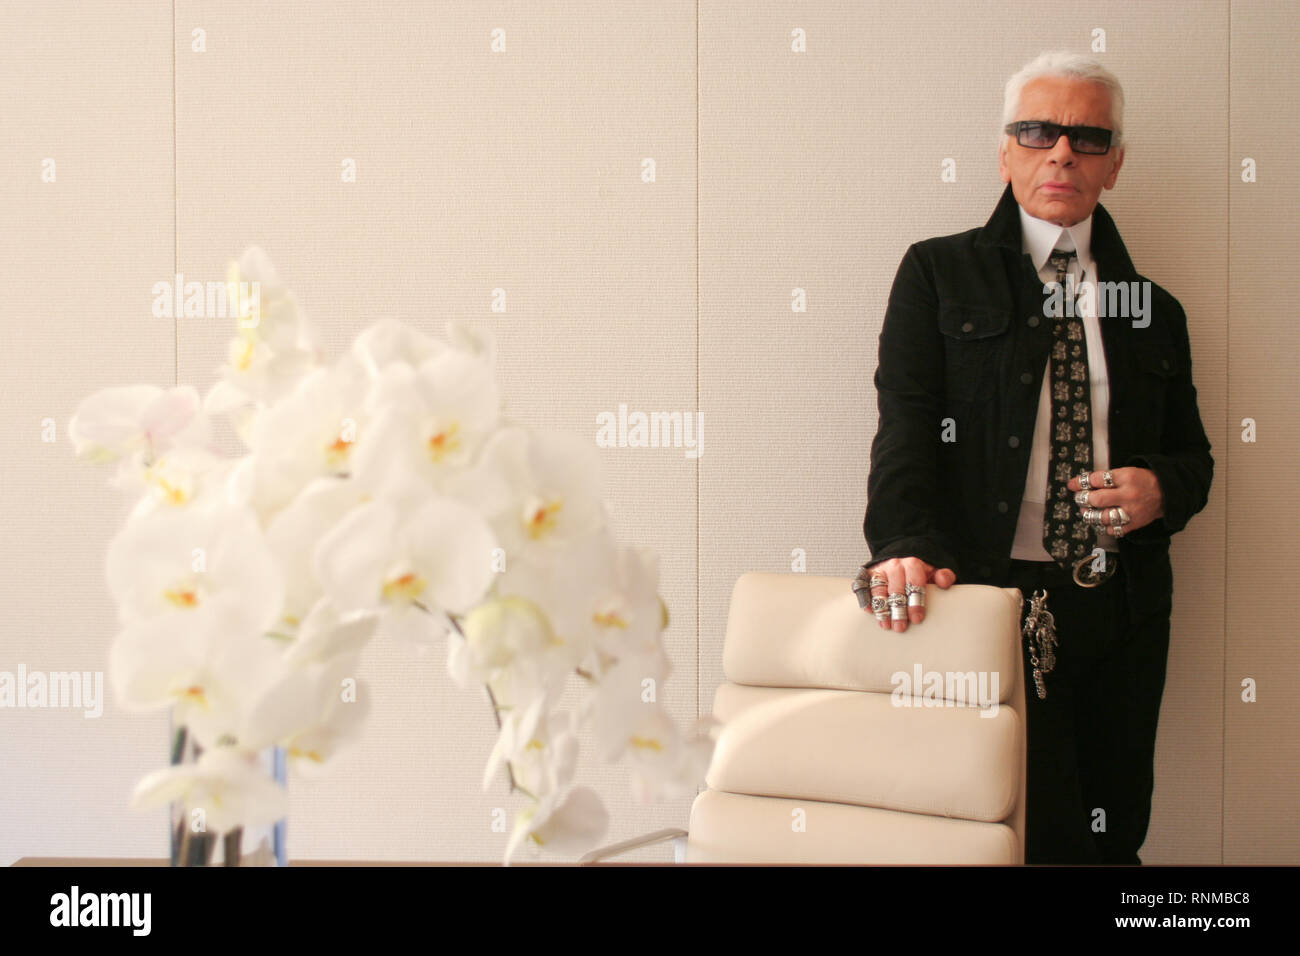 Karl Lagerfeld The premiere of 'Totally Spies' held at the Grand Rex Cinema  Paris, France - 28.06.09 Stock Photo - Alamy